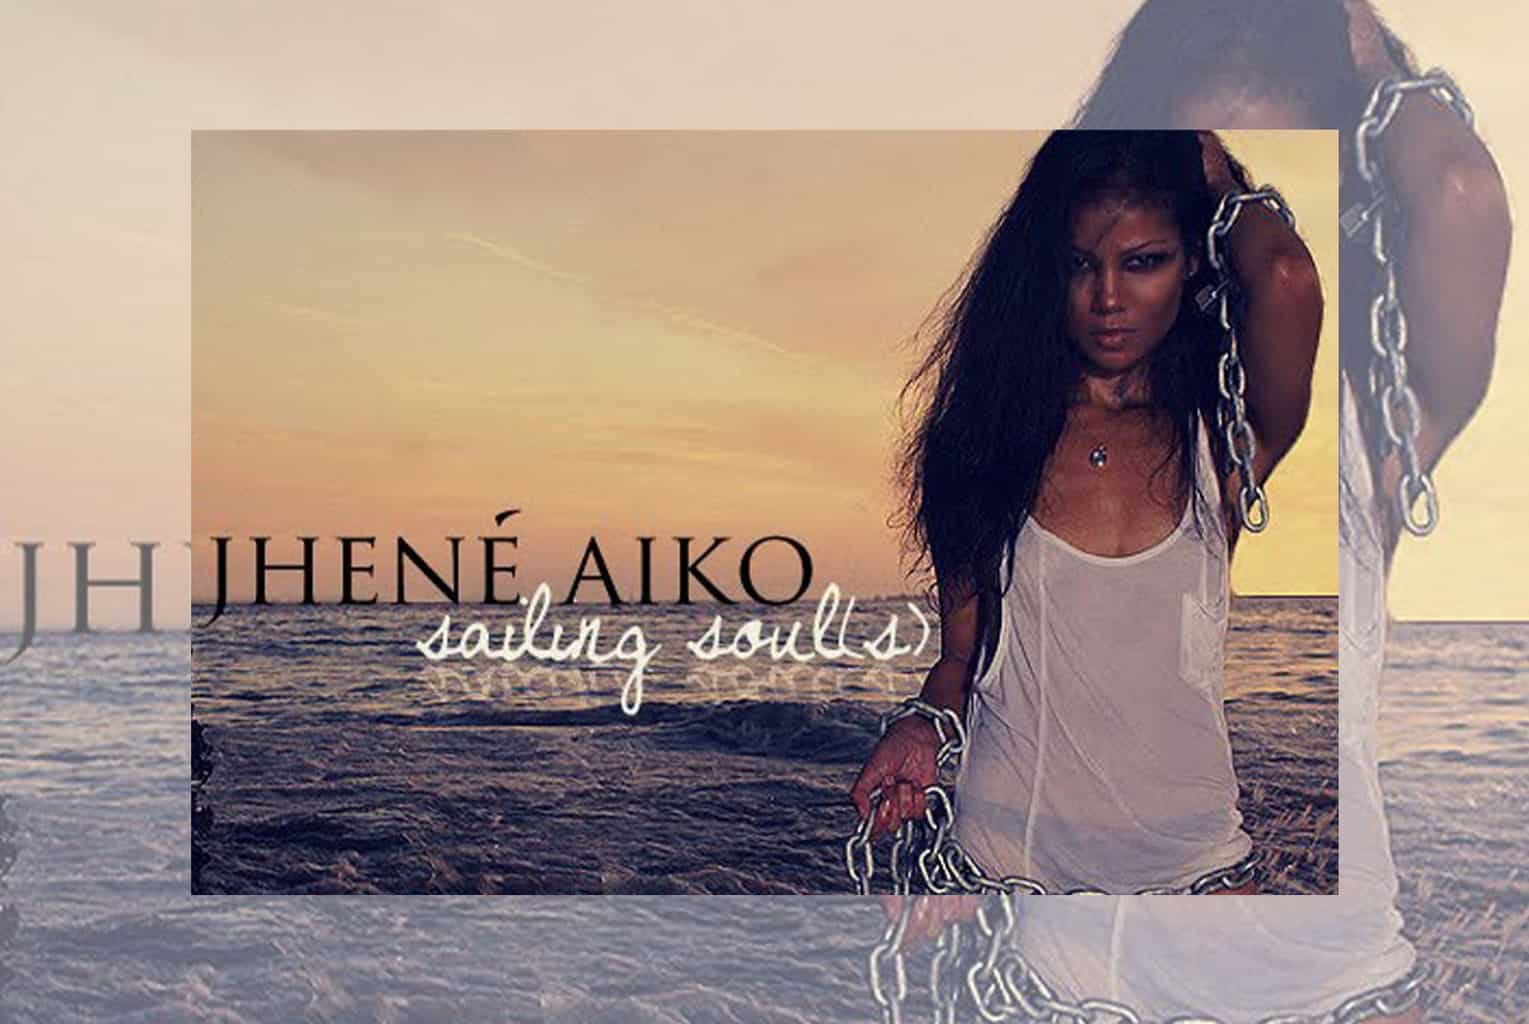 Jhené Aiko’s ‘Sailing Soul(s)’ Project Now Available On Major Streaming